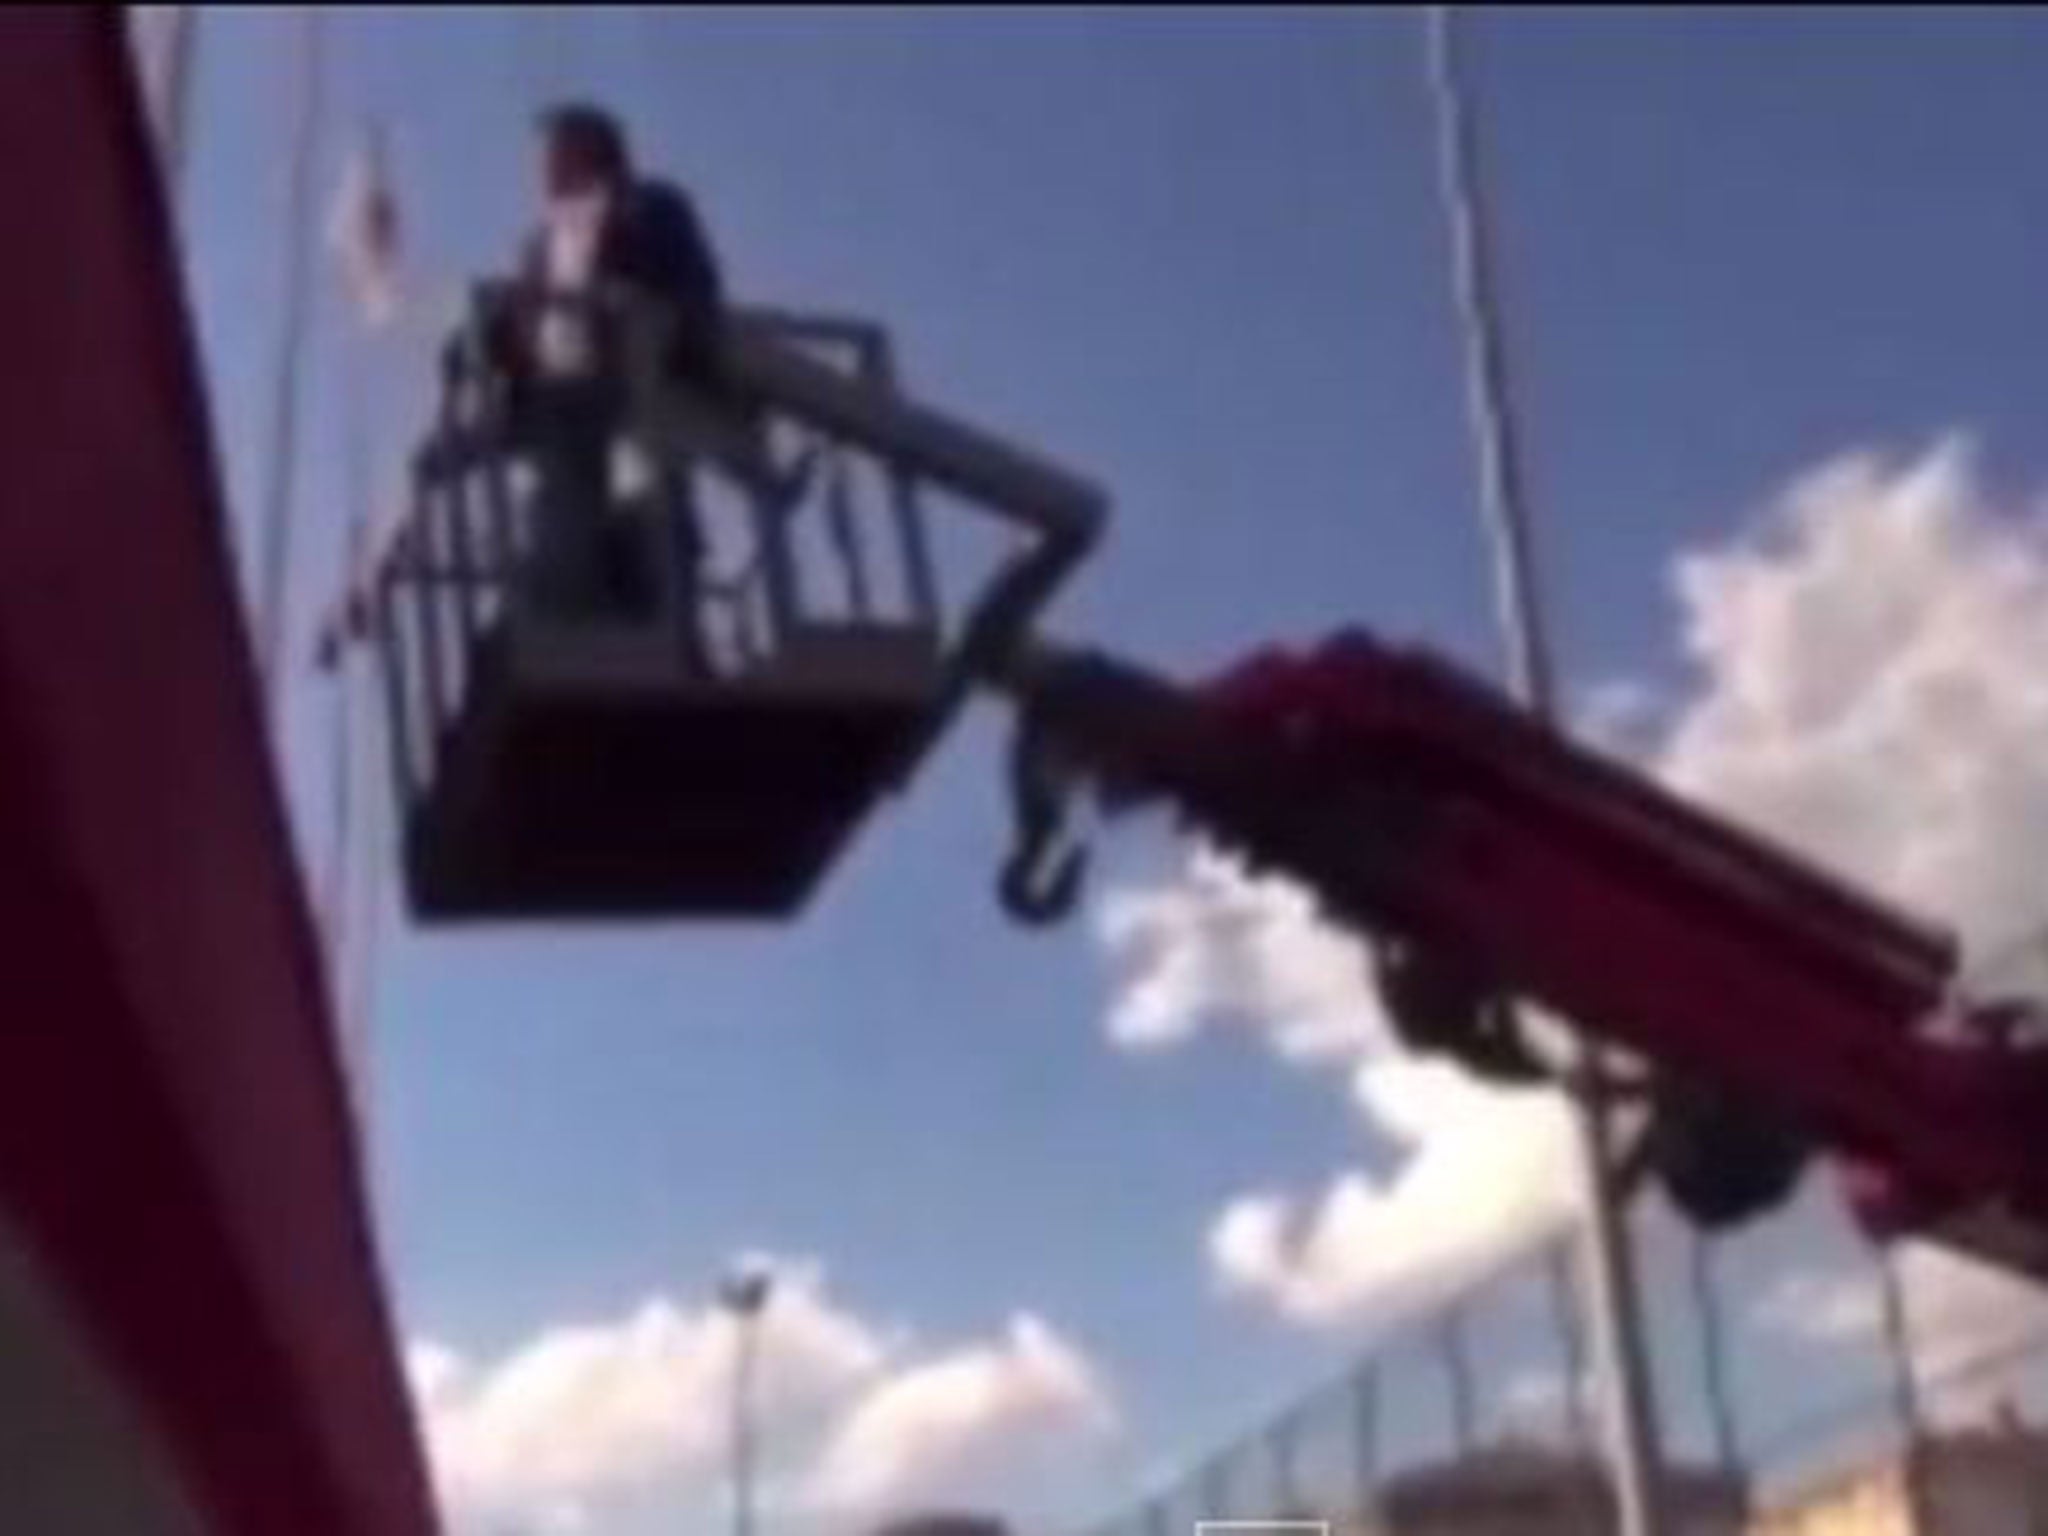 Hamsik Isit used a crane to see a game he was banned from